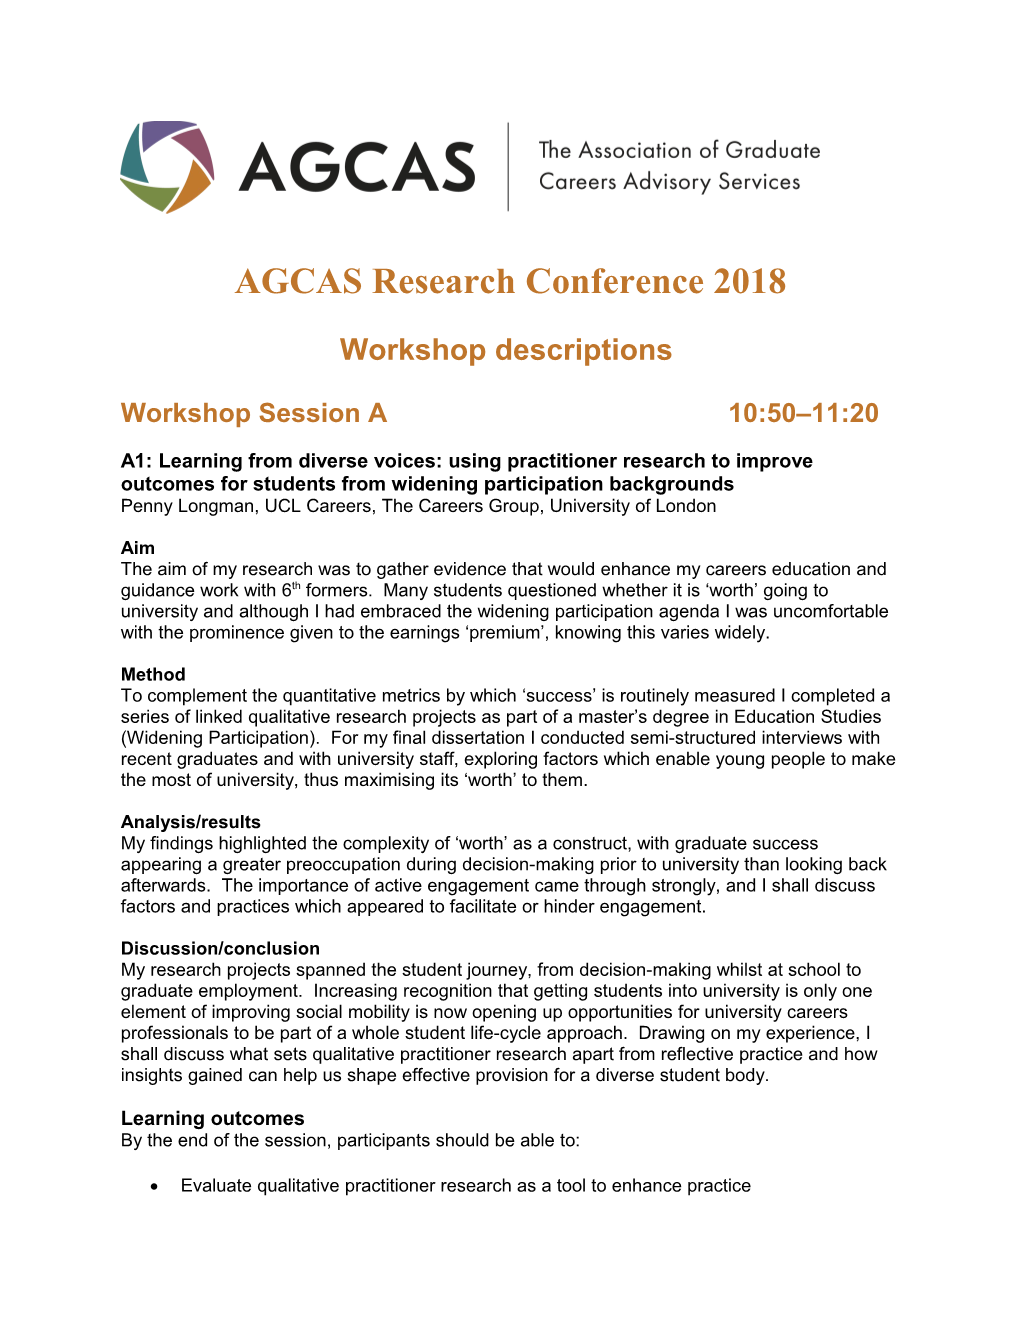 AGCAS Research Conference 2018